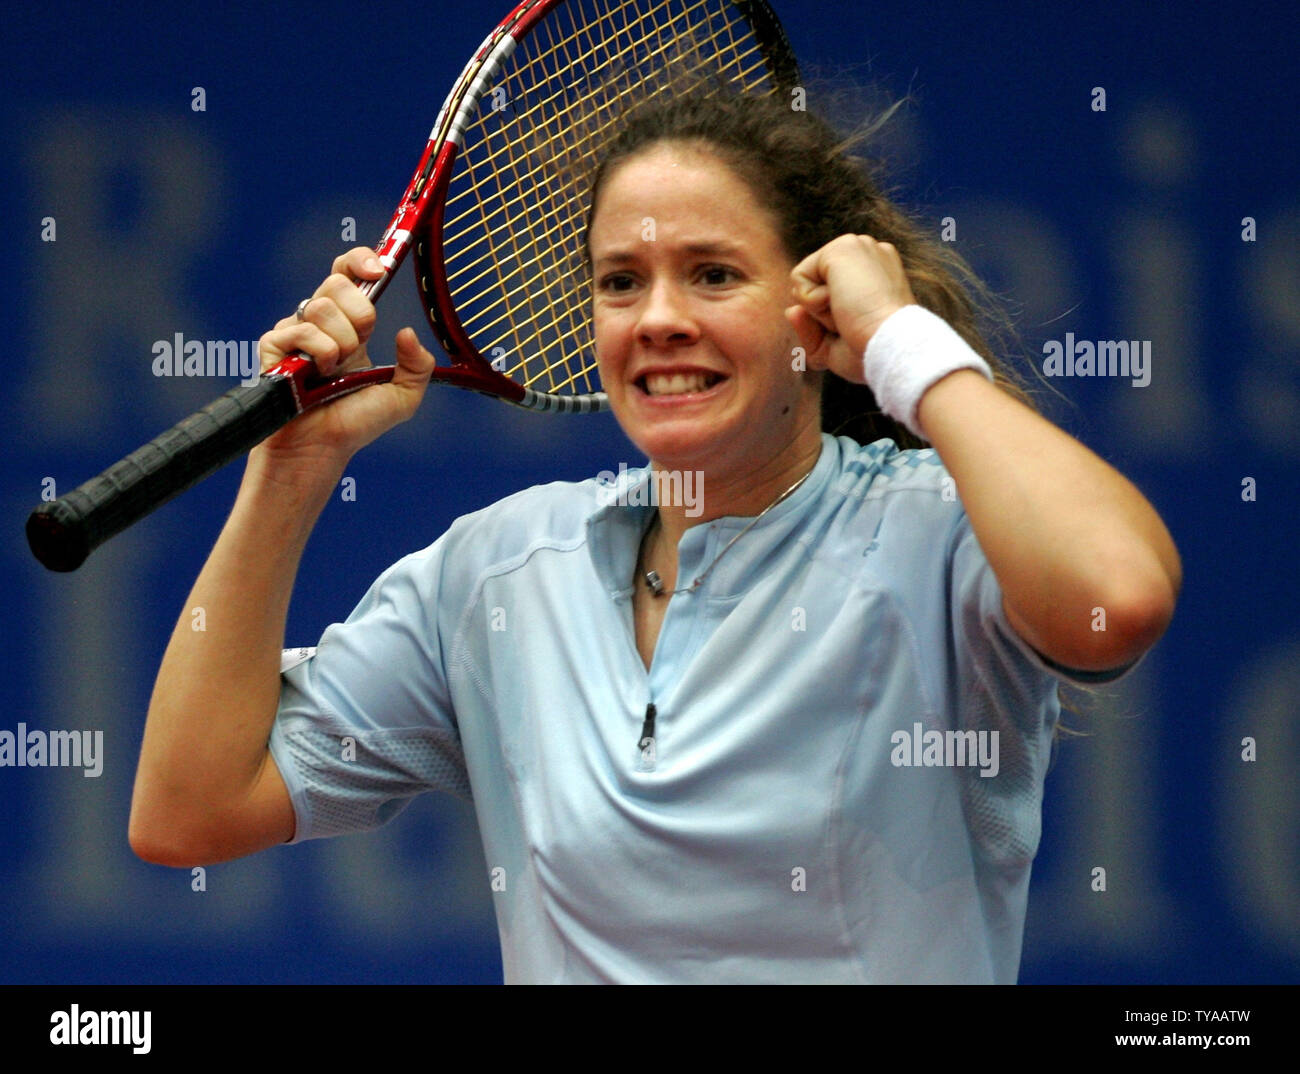 Patty Schnyder of Switzerland celebrates after winning a semifinal match  over Ana Ivanovic of Serbia and Montenegro, 7-5, 6-2 at the Generali Ladies Linz  Open in Linz, Austria on October 29, 2005.